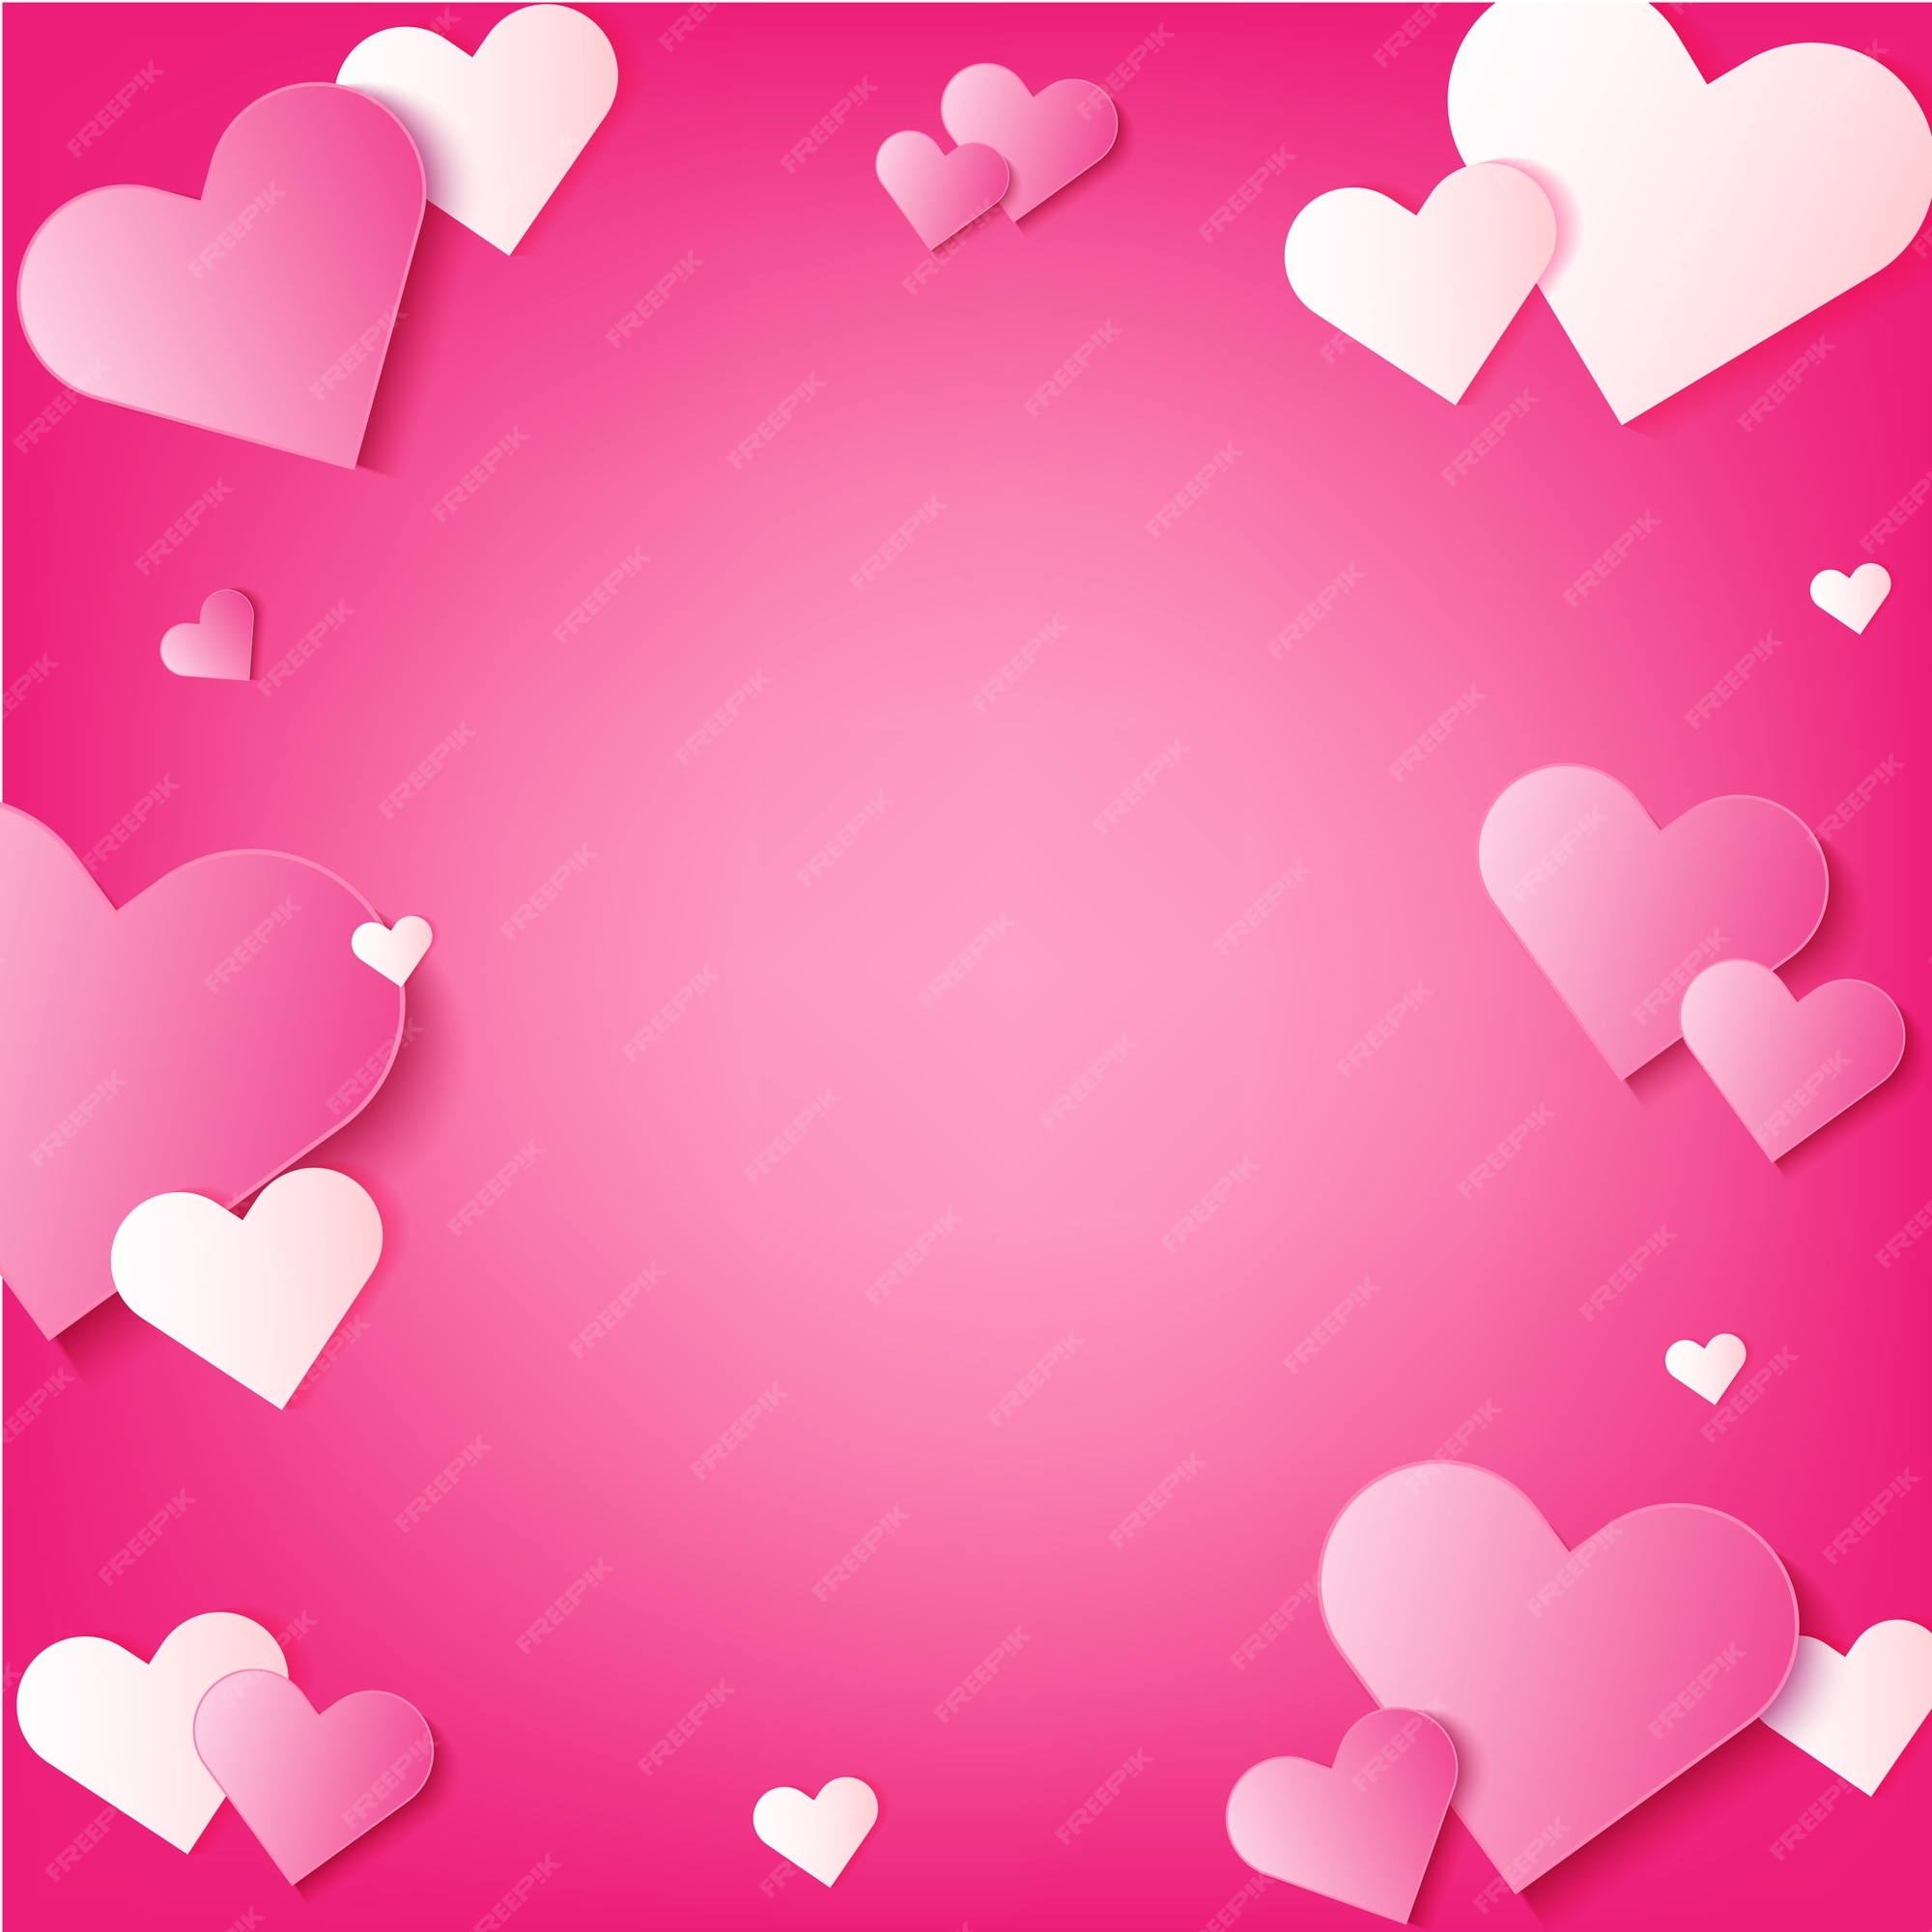 Premium Vector | Heart on pink color background.